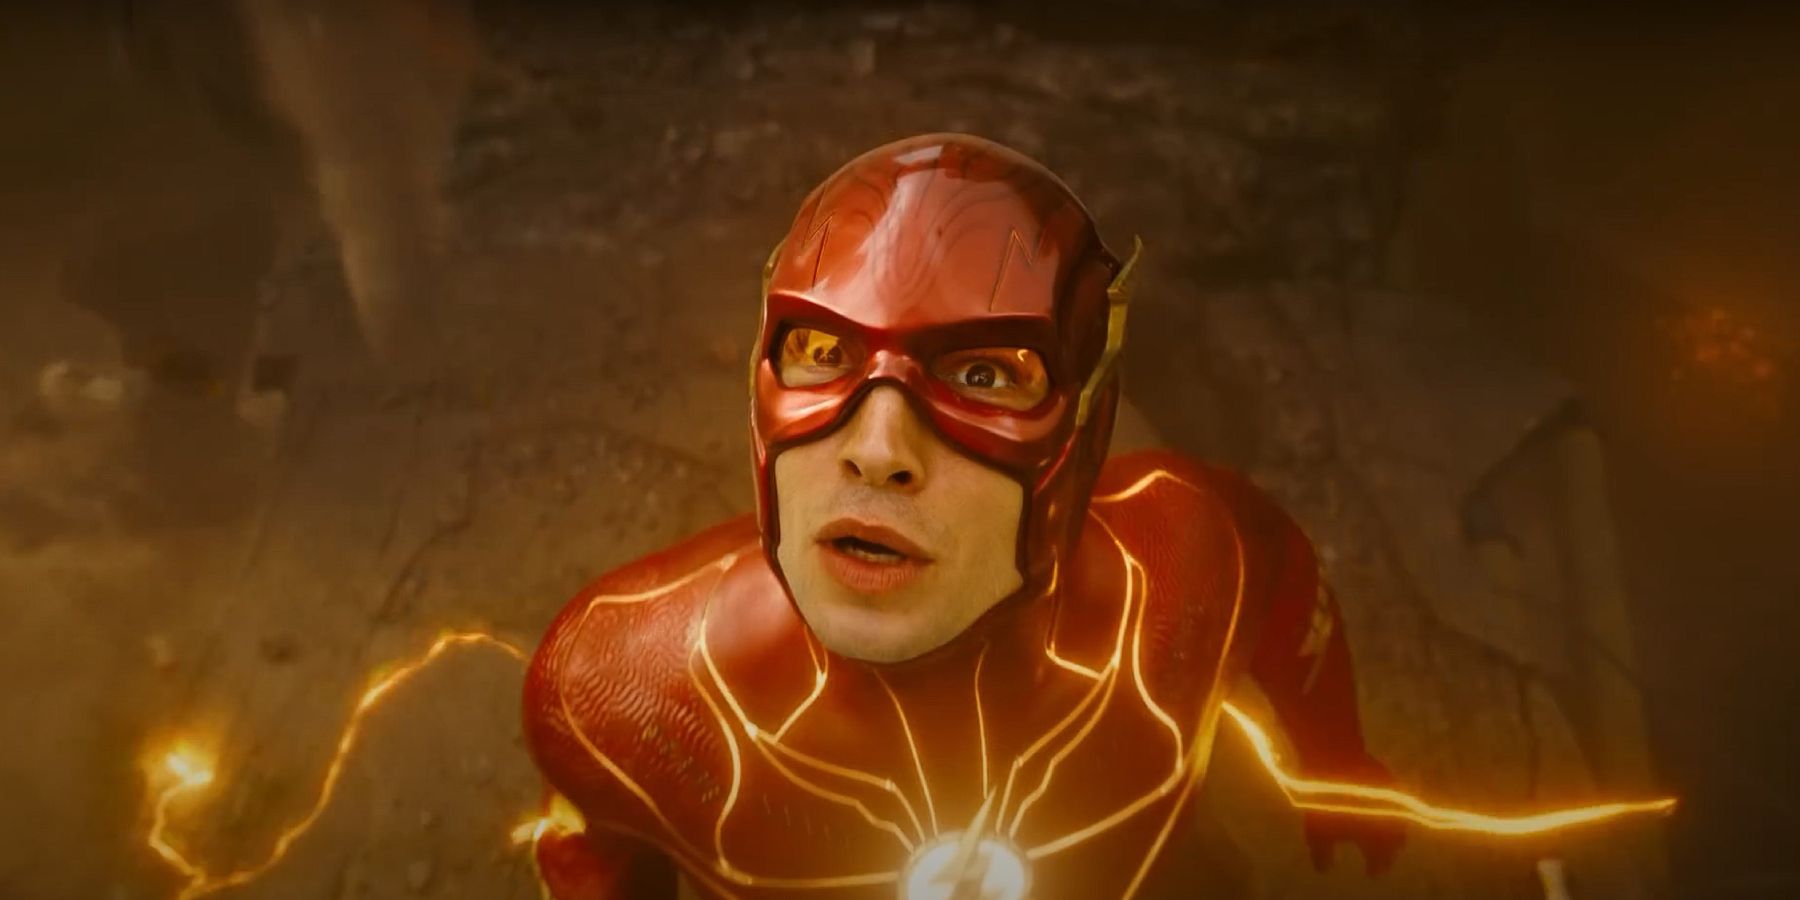 Ezra Miller as The Flash surprised with lighting bolts coming out of suit